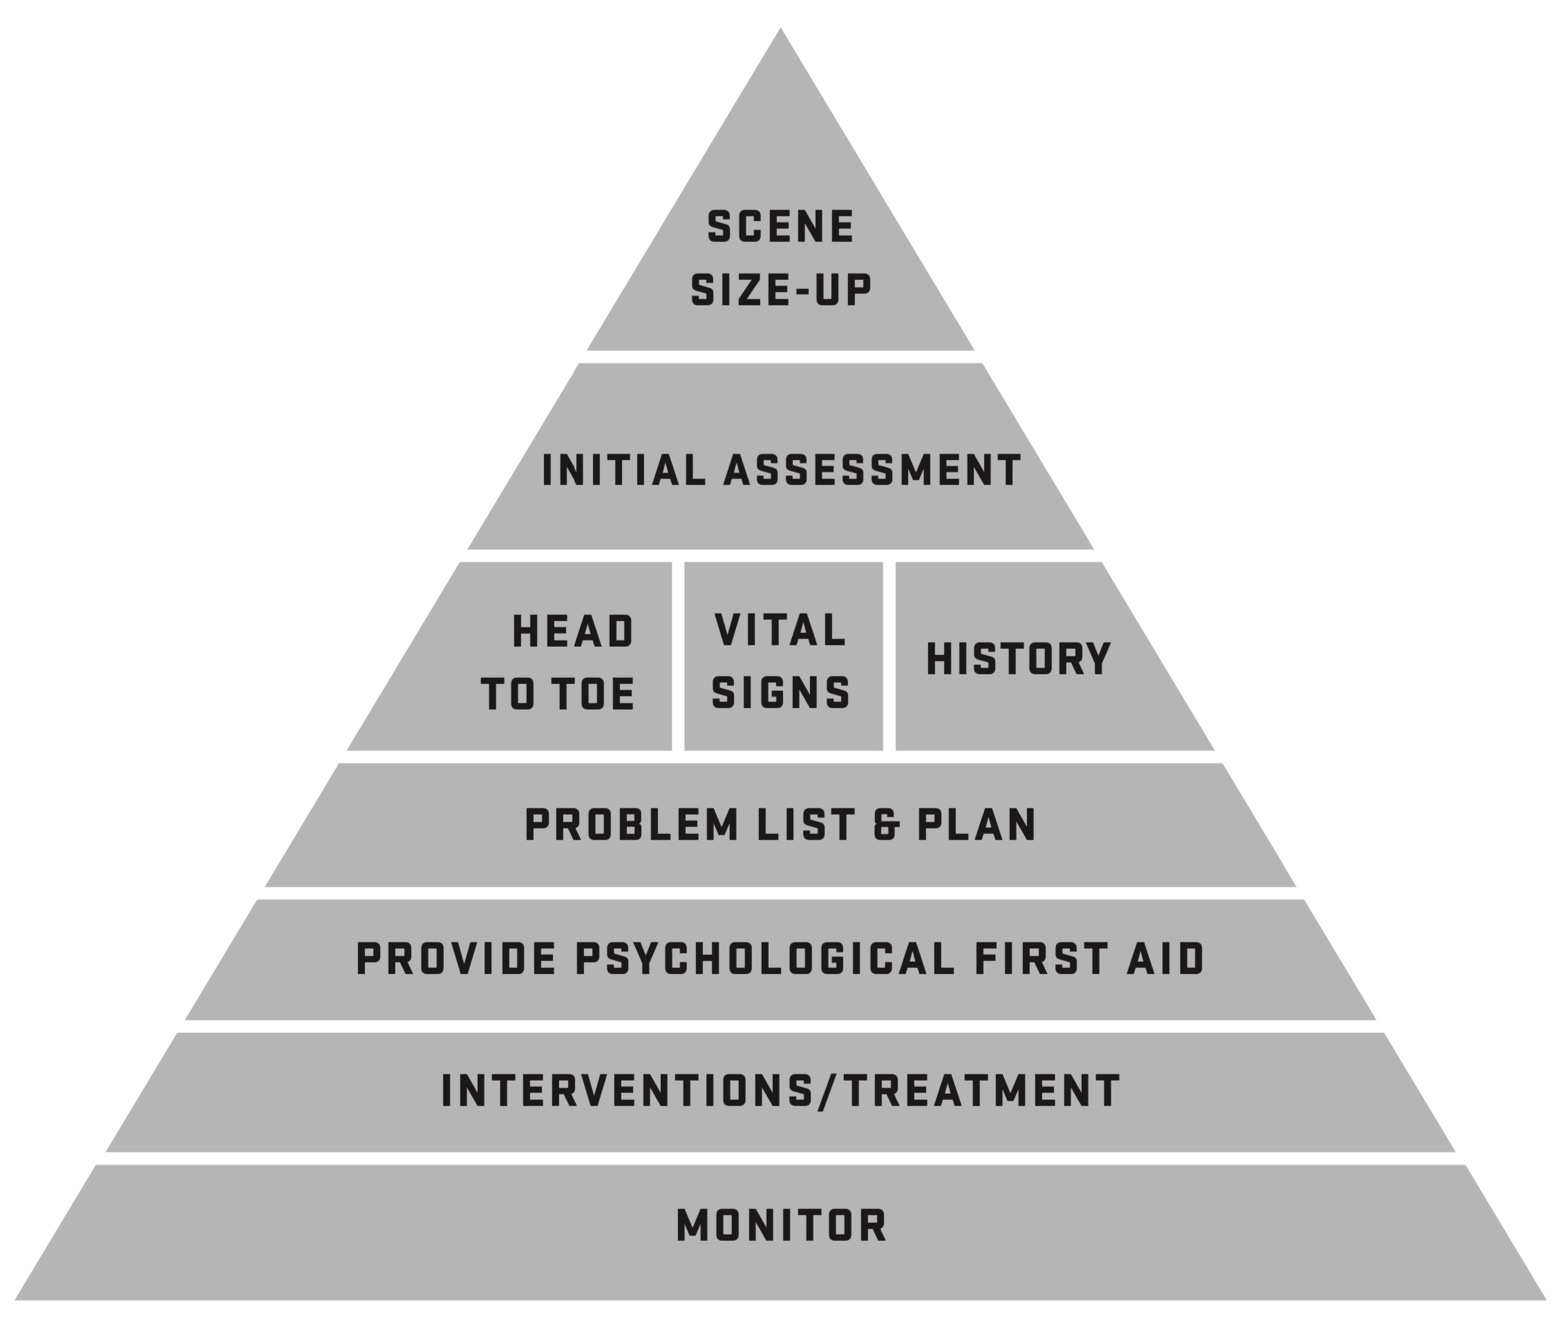 The Patient Assessment Triangle taught during WFR